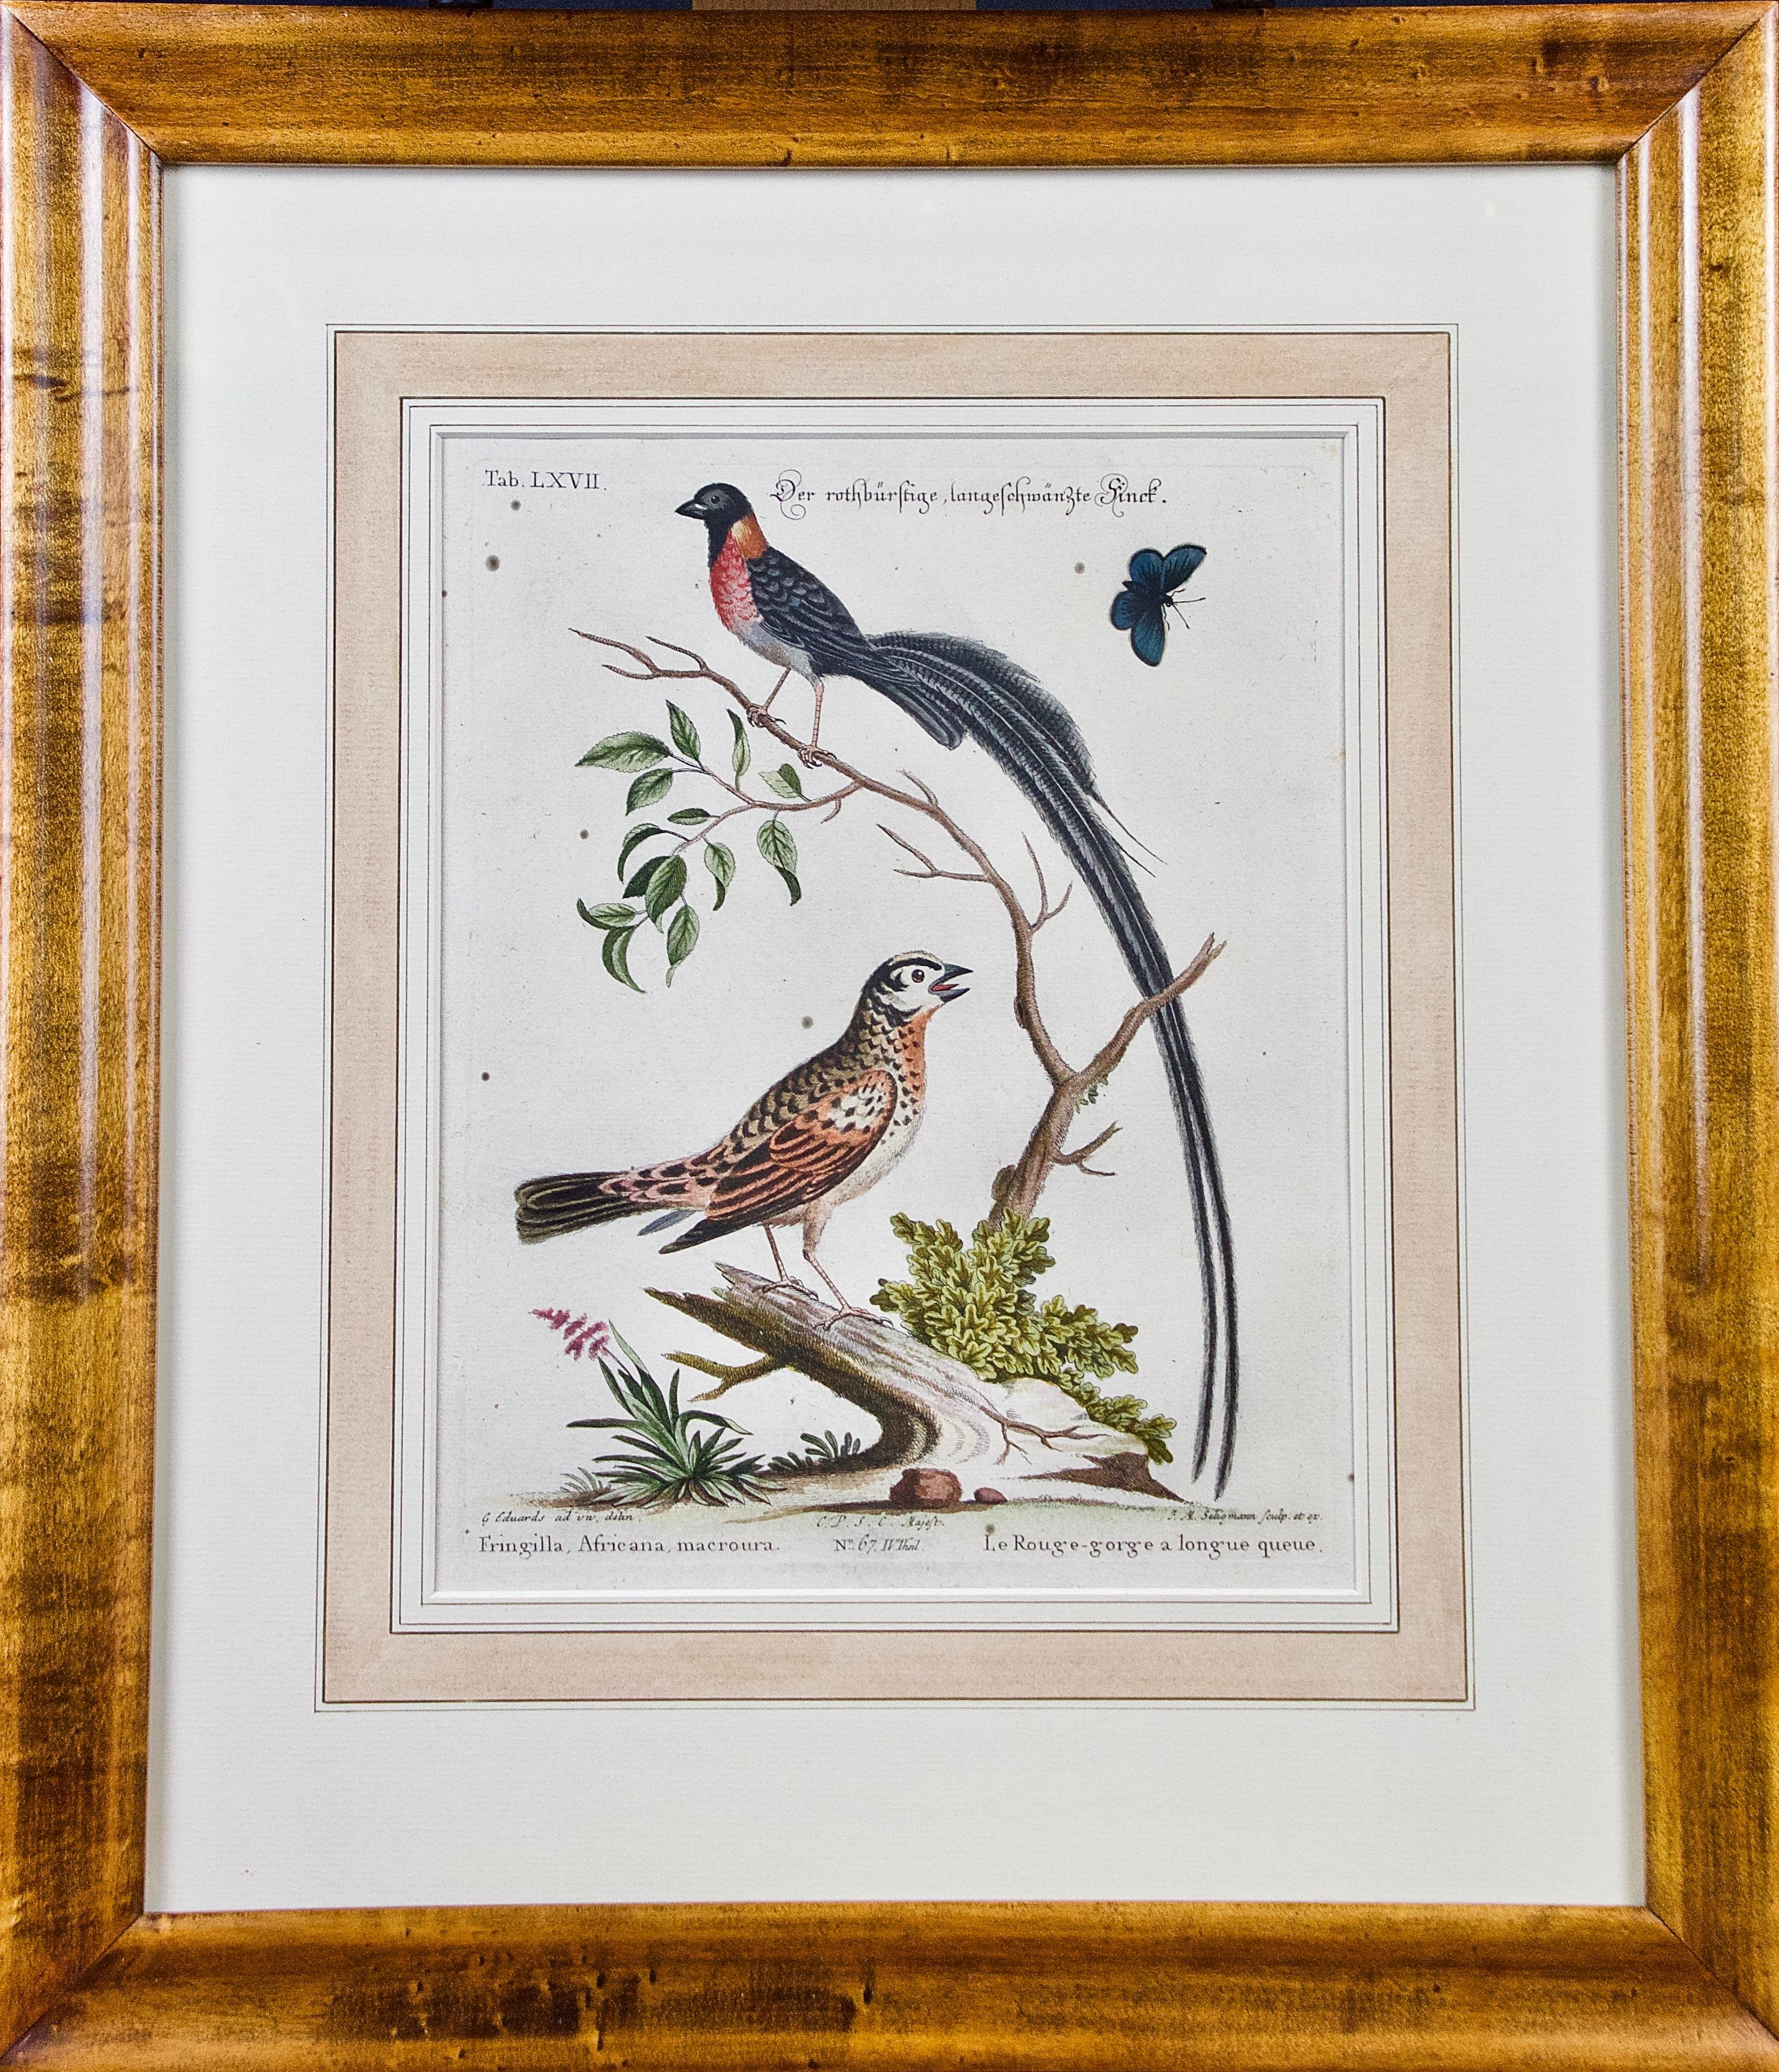 Three 18th century hand colored copper-plate engravings of exotic birds drawn by George Edwards 1694-1773), the premier British natural history artist of the era and known as 